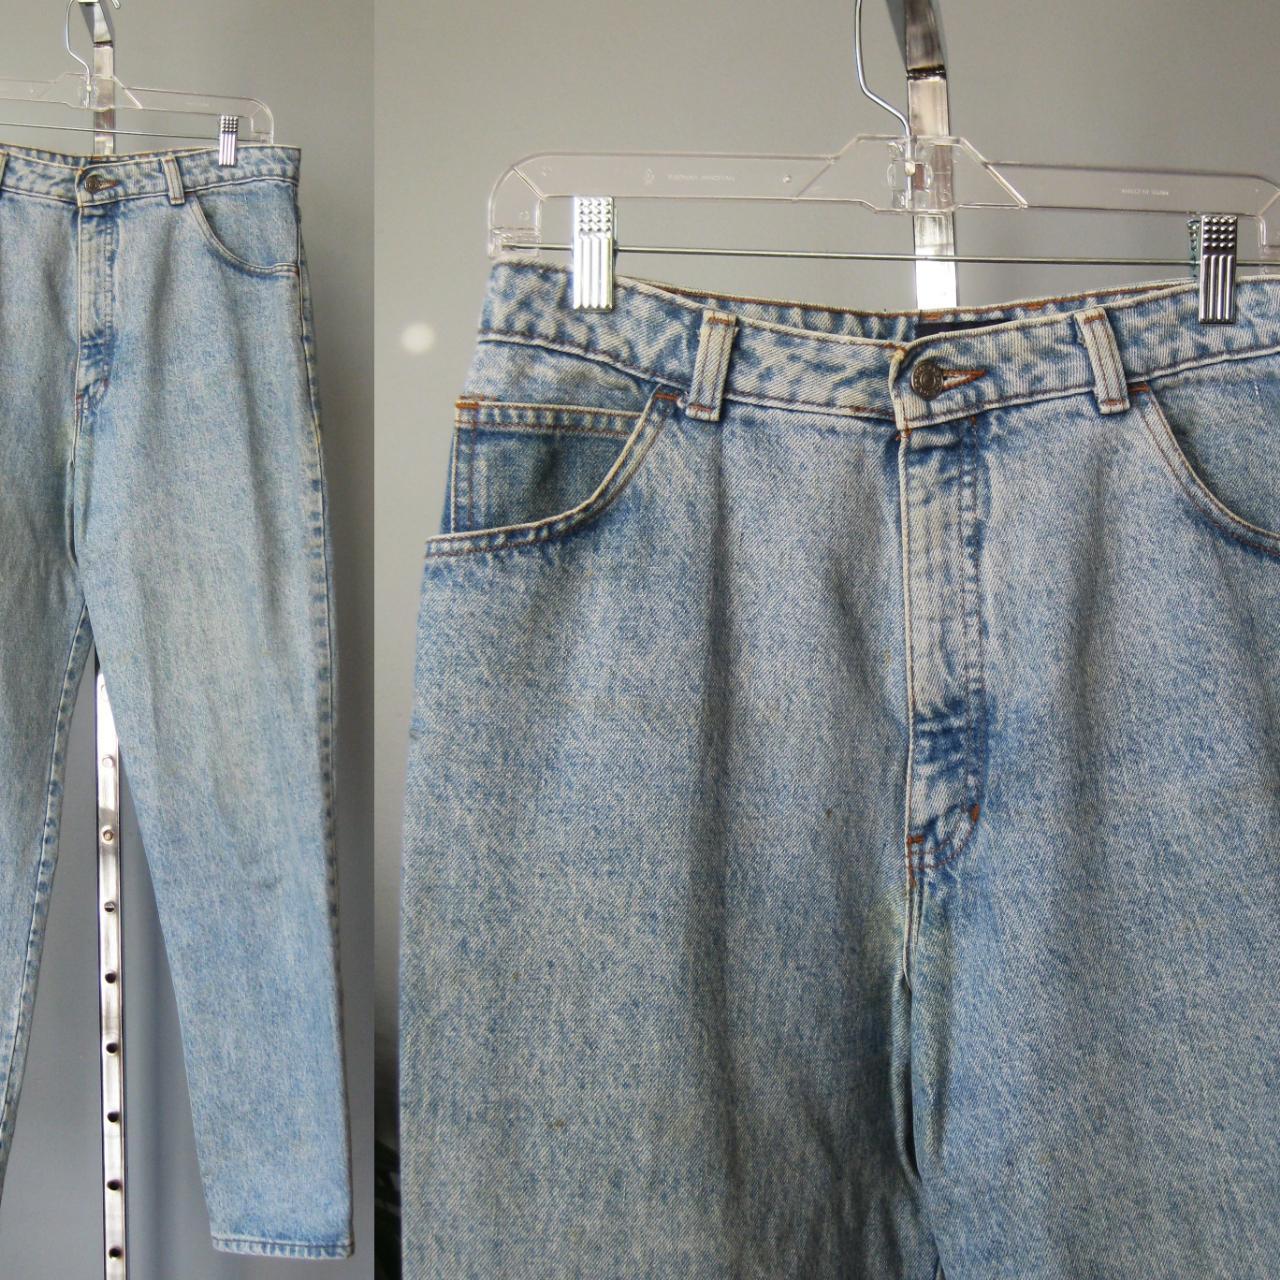 What year do you think these GAP blue jeans are from? Vintage